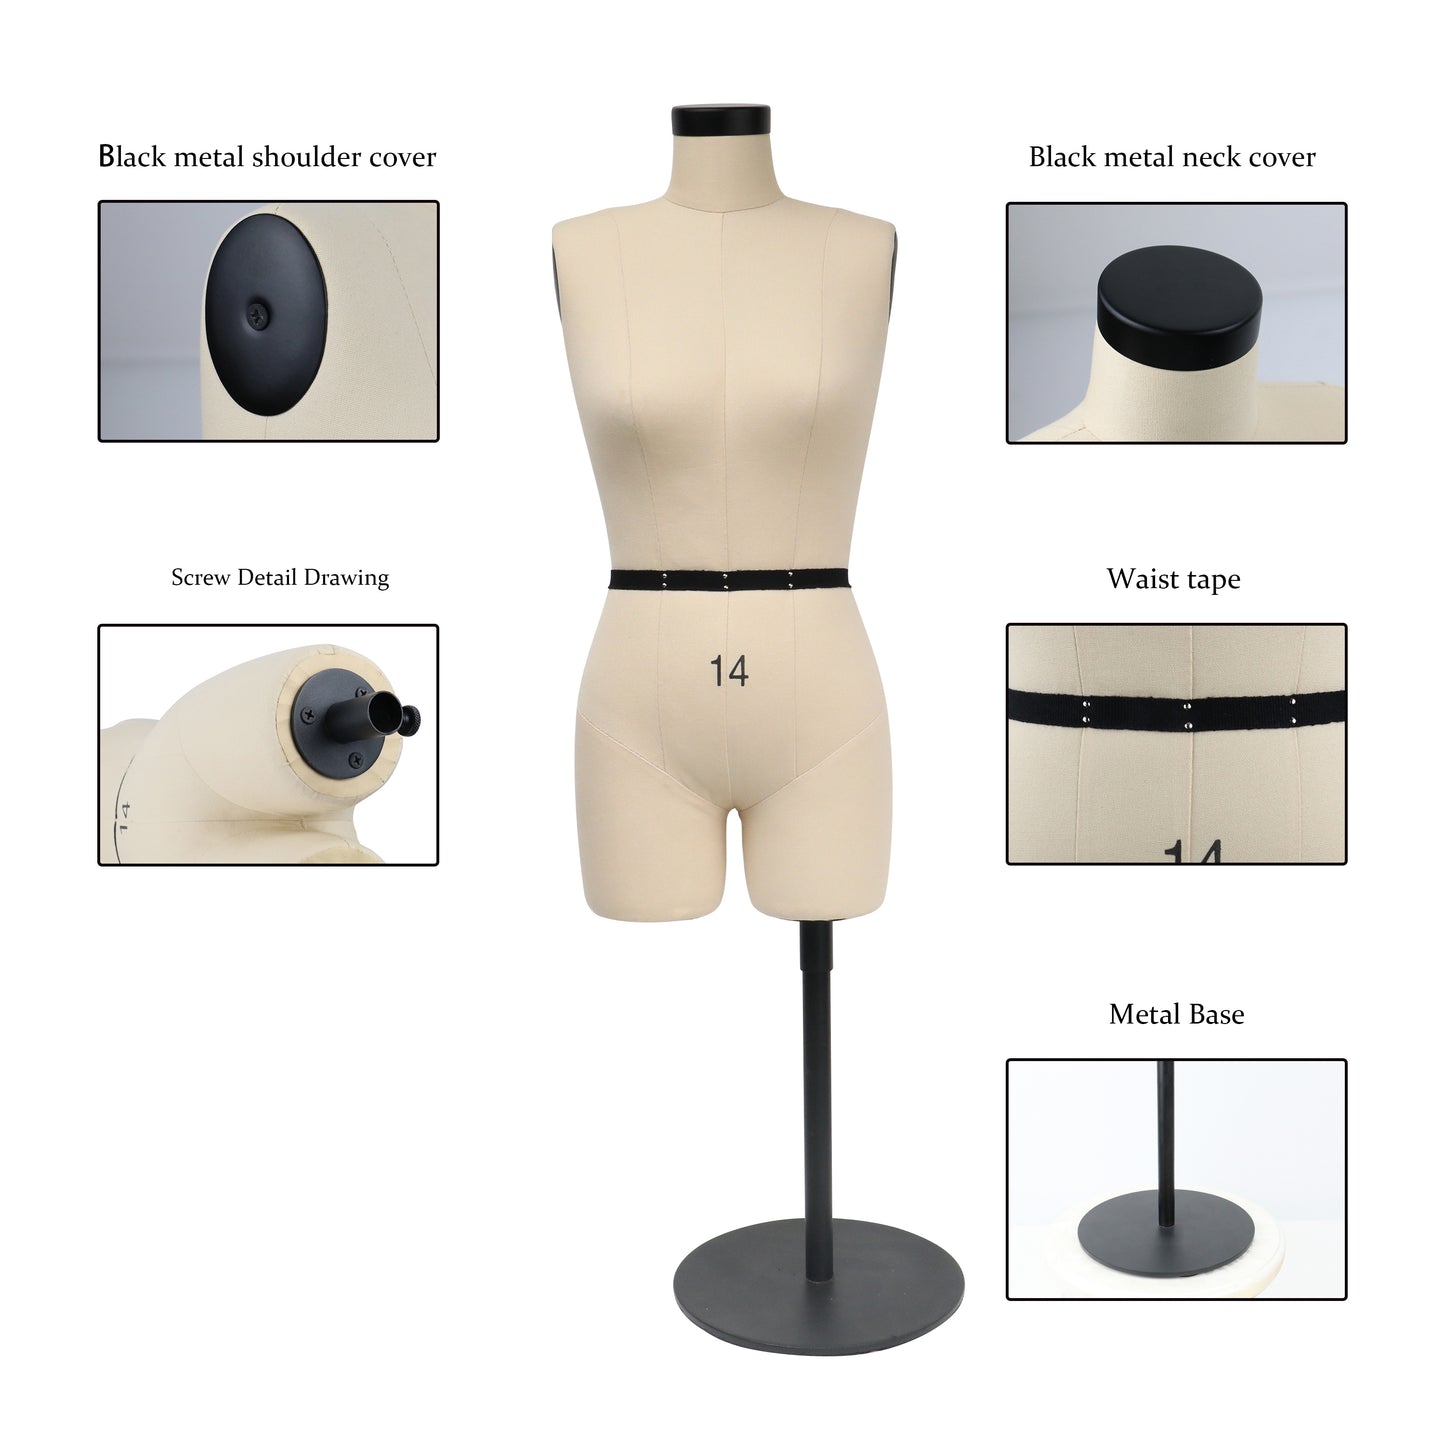 Jelimate Size 14 Female Half Scale Dress Form For Sewing,Mini Tailor Mannequin for Fashion Designer Pattern Making,Miniature Women Sewing Mannequin for Fashion School Draping Mannequin